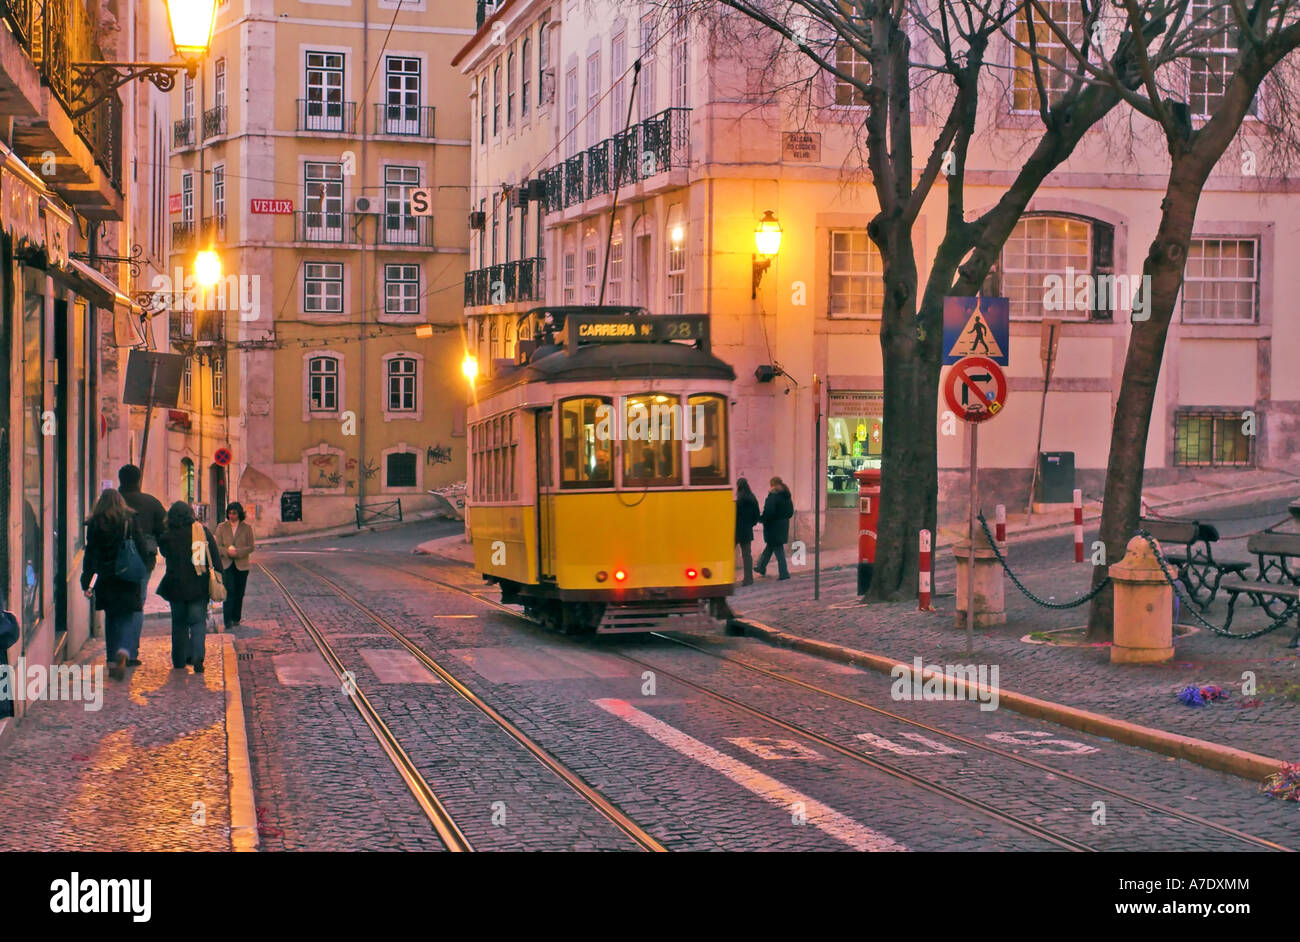 famous tramway number 28 in old town, Portugal, Lisbon Stock Photo